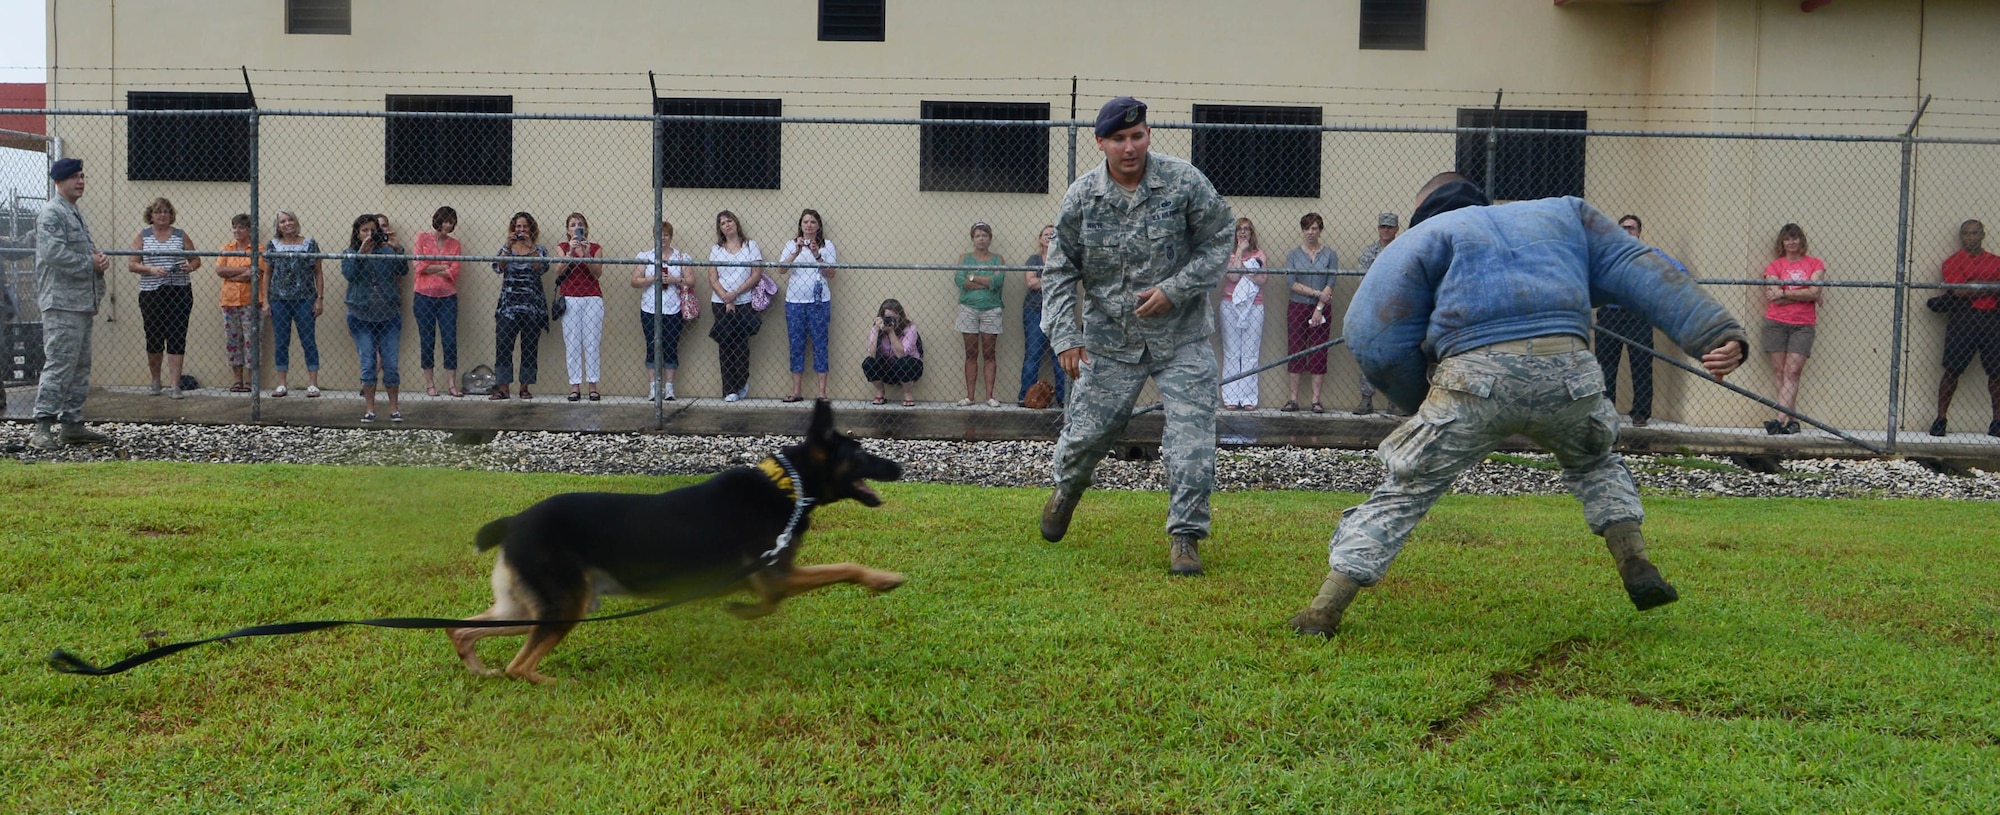 Staff Sgt. Terry White, 36th Security Forces Squadron military working dog handler, releases “Bogi” on a decoy during a demonstration for military spouses Oct. 22, 2013, on Northwest Field, Guam. 36th Wing commanders’ and chiefs’ spouses observed the demonstration during a base tour for a better understanding of the capabilities of the handlers and their dogs. (U.S. Air Force photo by Airman 1st Class Emily A. Bradley/Released)